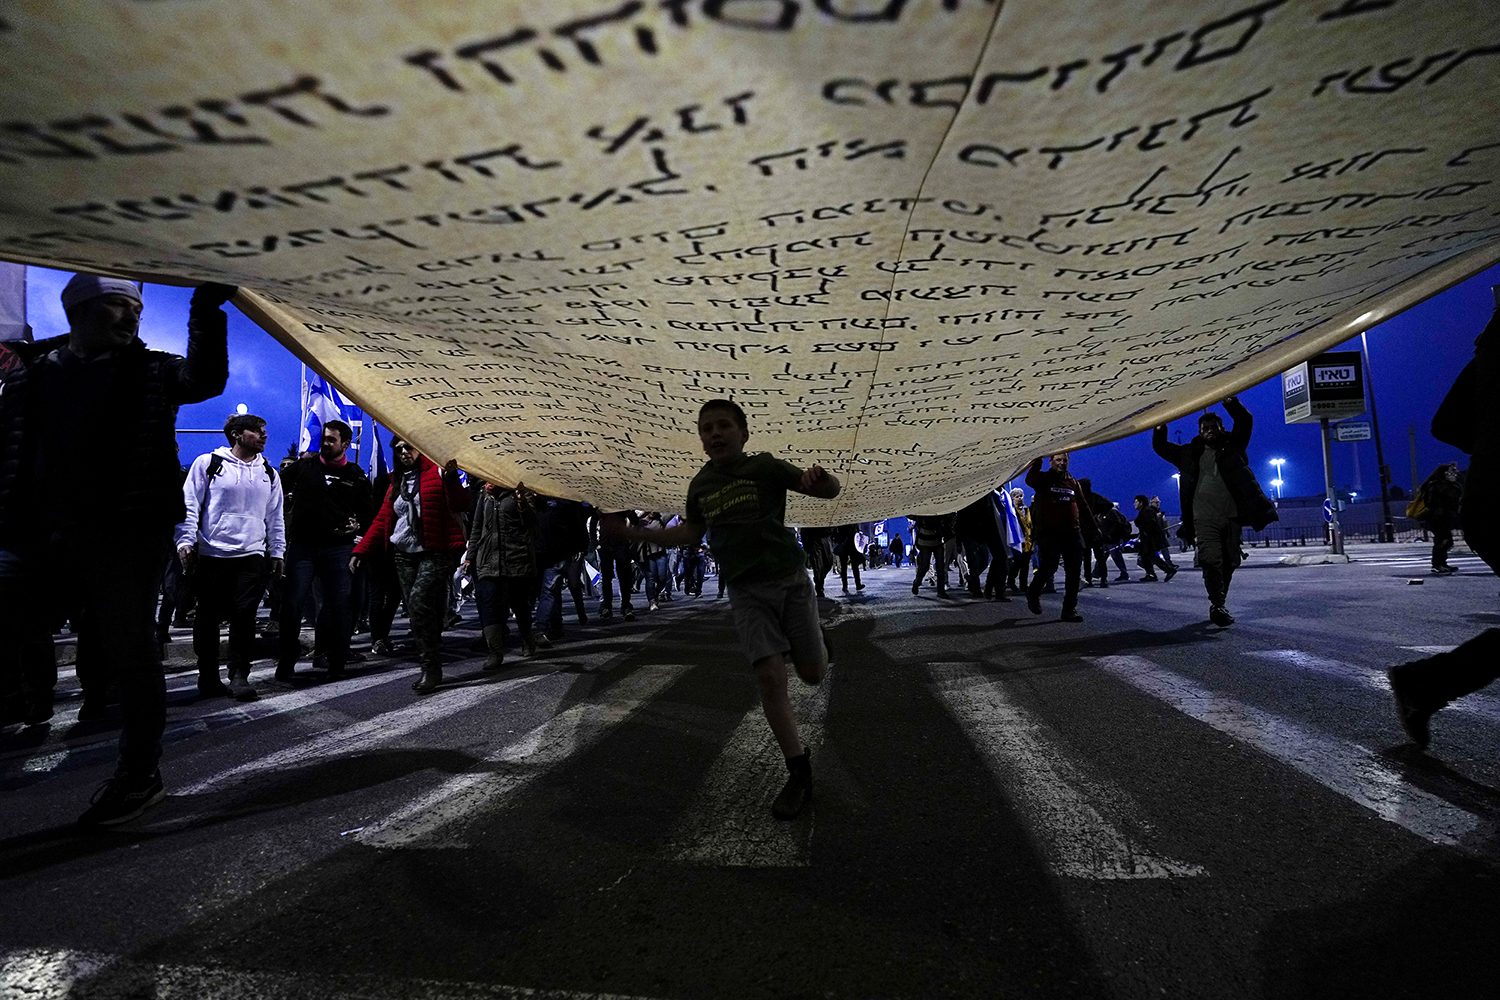 Protesters carry a large copy of the Israeli Declaration of Independence during a protest Feb. 20, 2023, near the Knesset, Israel’s parliament, in Jerusalem. Demonstrators oppose plans by Prime Minister Benjamin Netanyahu’s new government to overhaul the judicial system. (AP Photo/Ohad Zwigenberg)